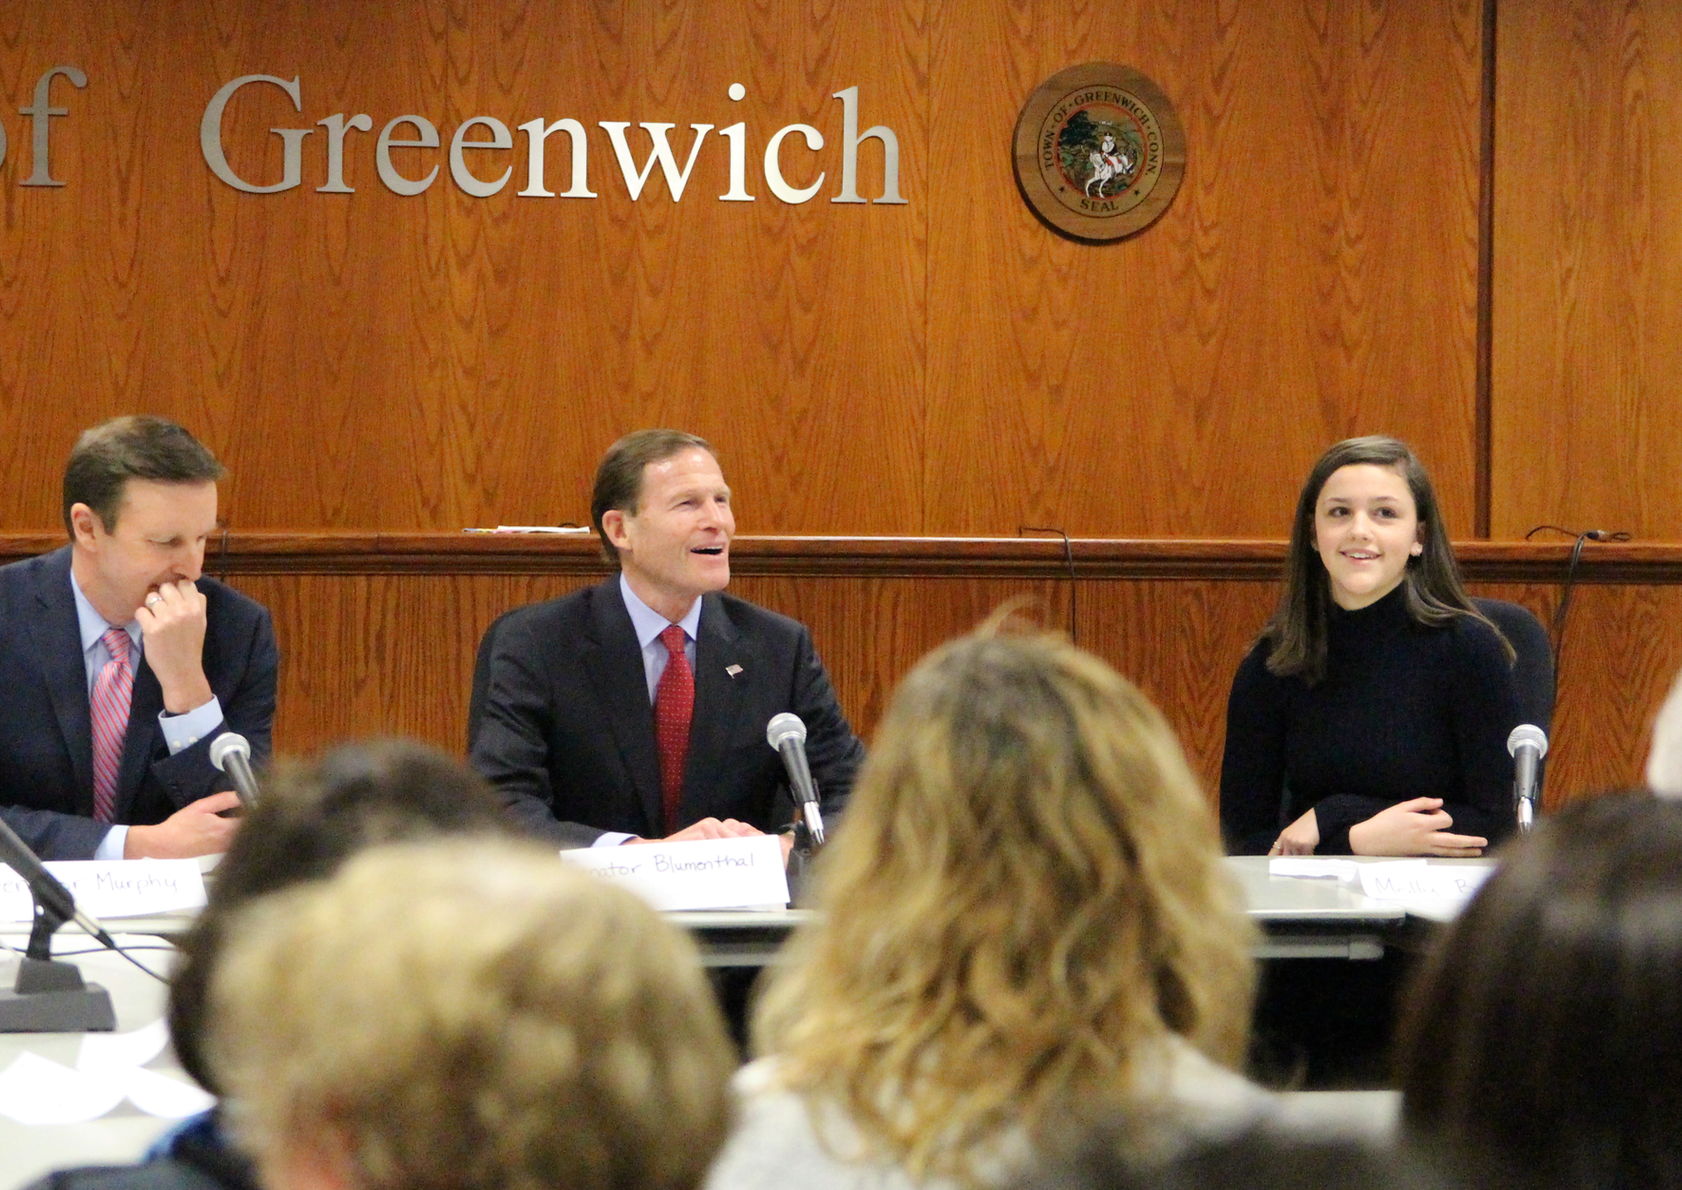 Senators Chris Murphy and Richard Blumenthal, Molly Baker from Fairfield Ludlowe. March 2, 2018 Photo: Leslie Yager